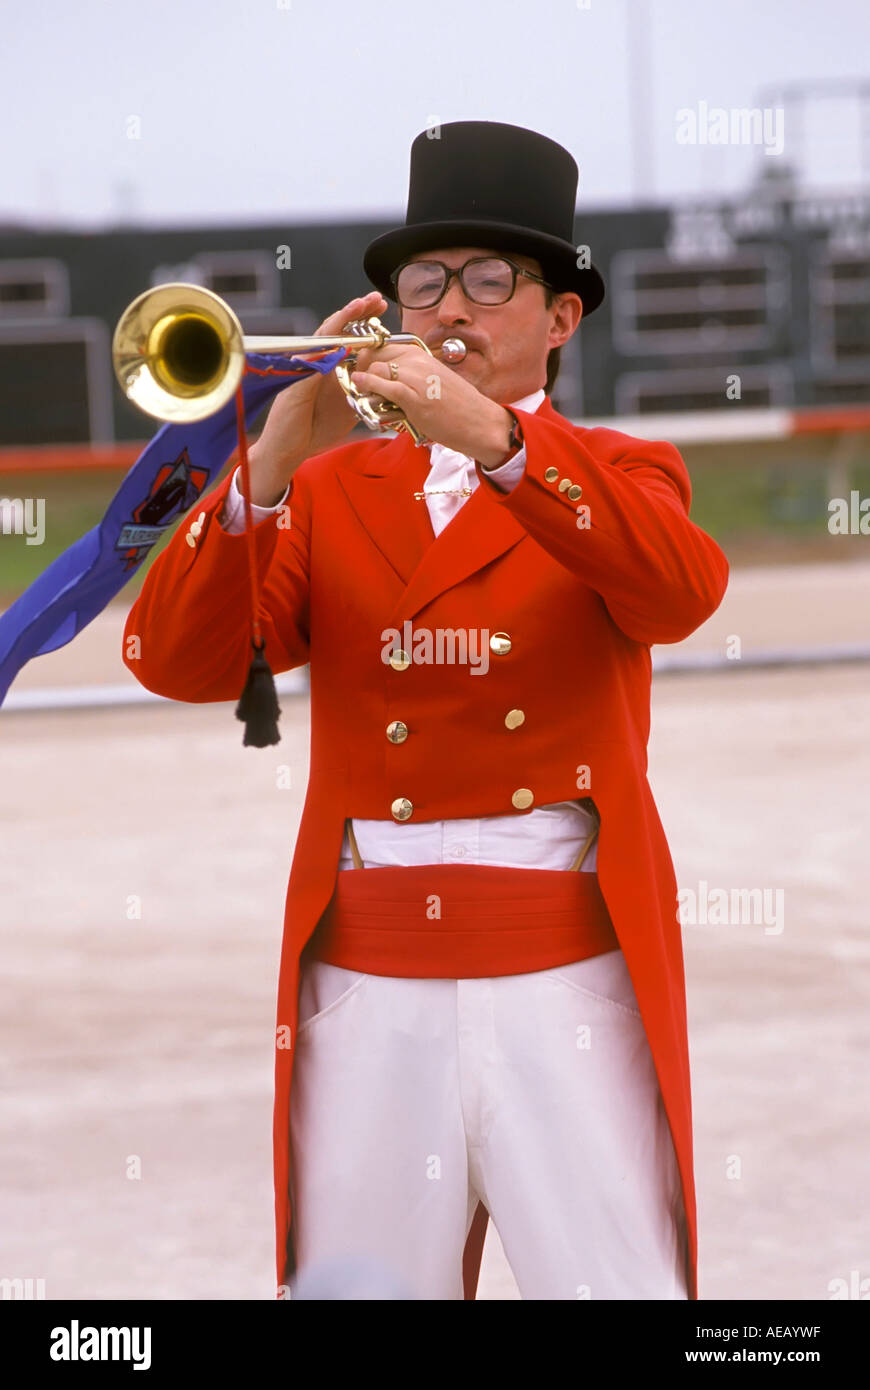 Trumpeter announces the start of racing at Prairie Meadows horse race track Des Moines Iowa IA Stock Photo